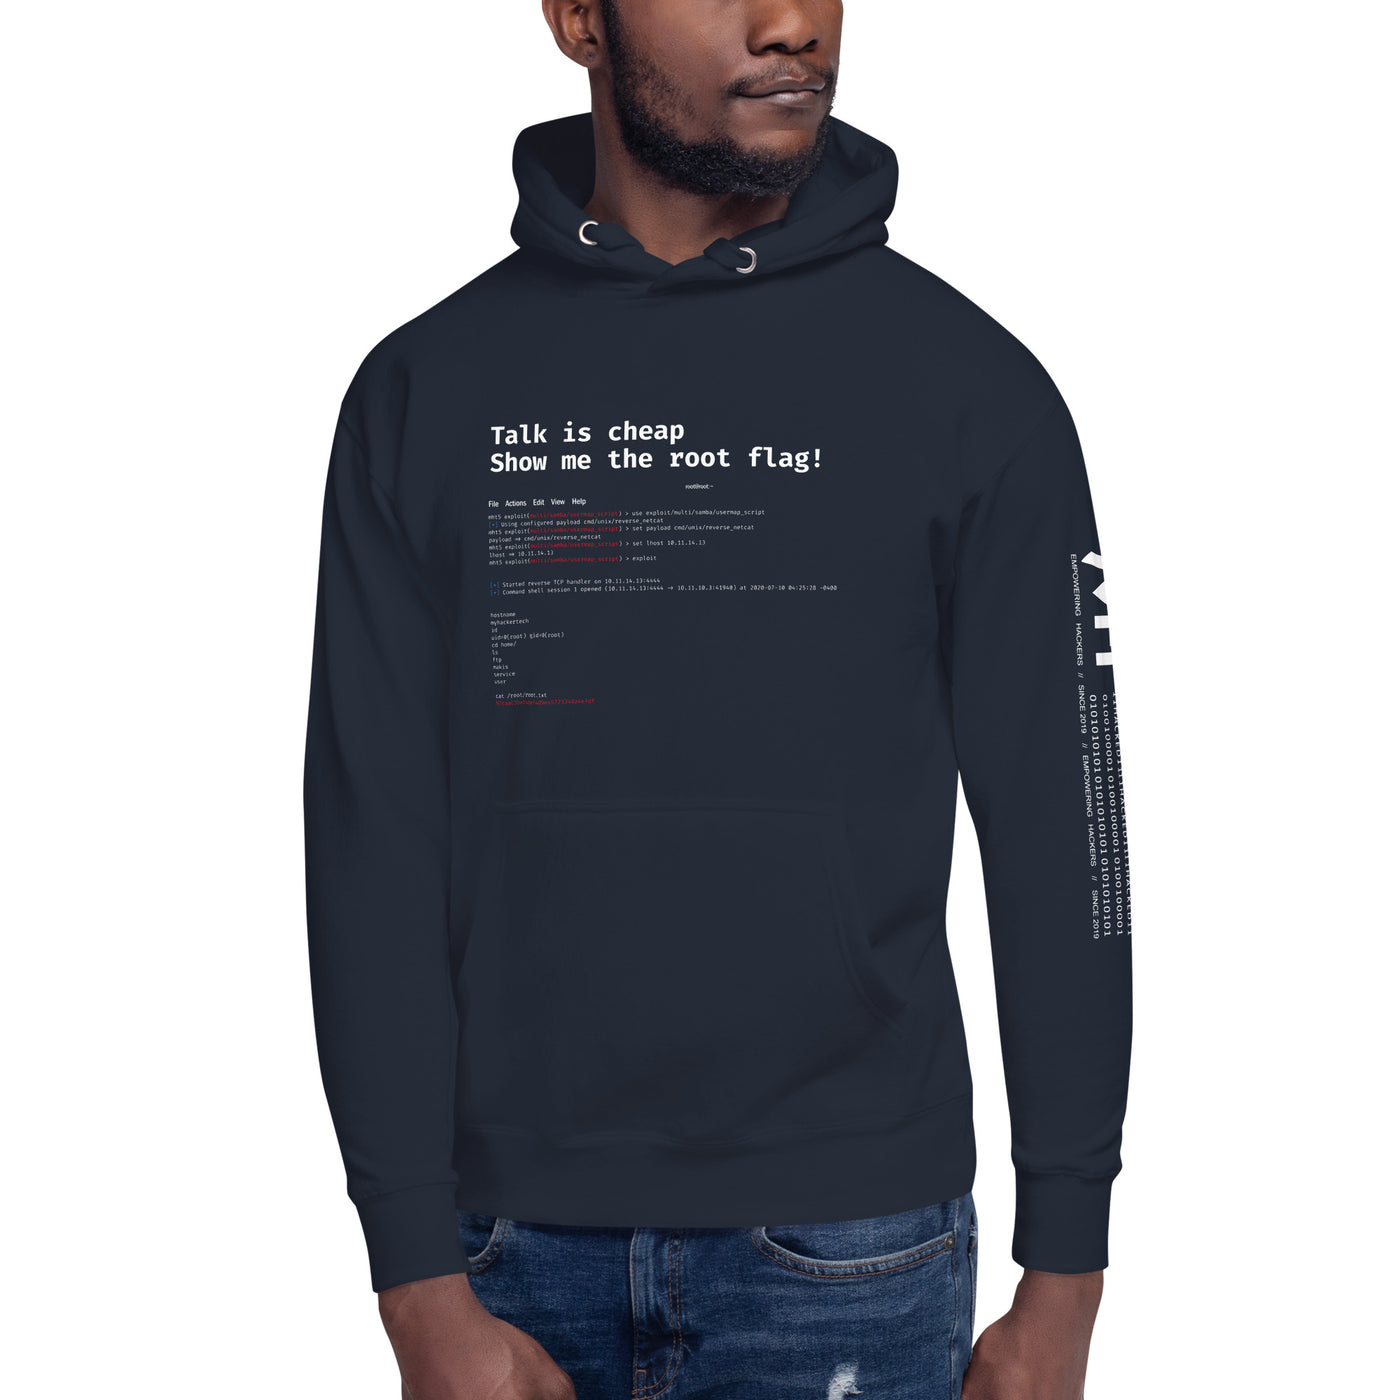 Talk is cheap show me the root flag - Unisex Hoodie